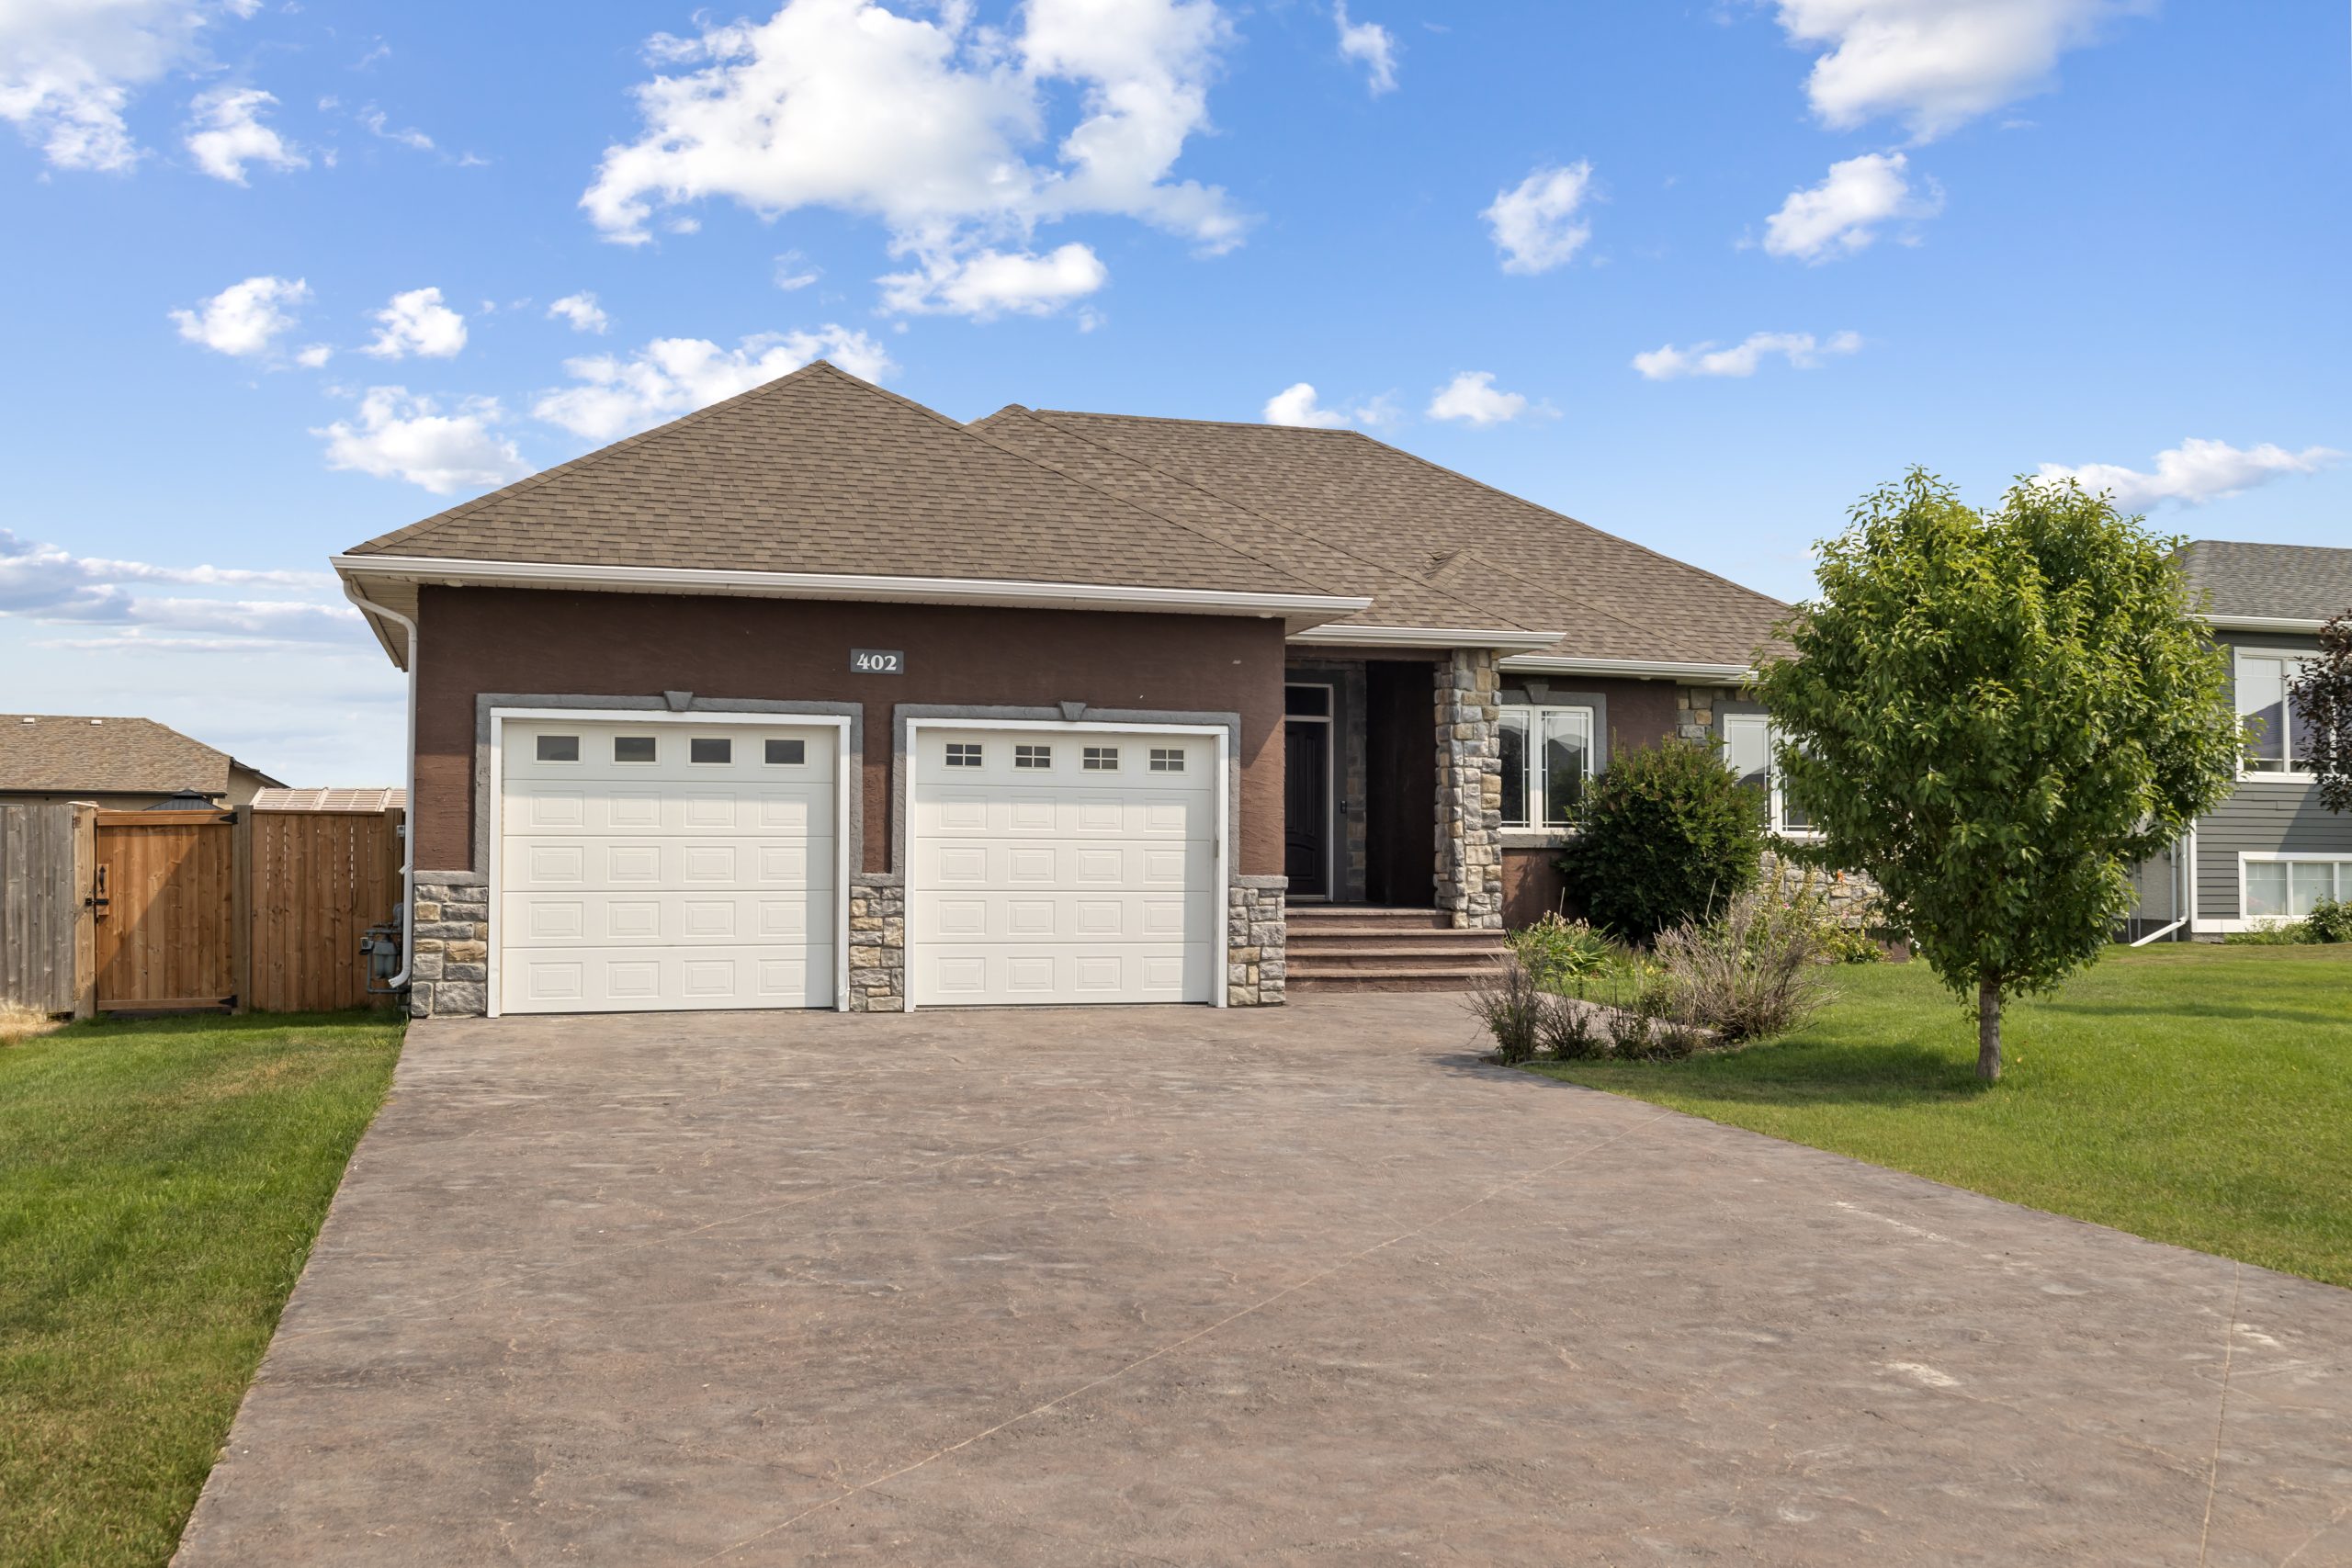 402 St George Place | Luxury Living in Niverville: 5-Bedroom Custom Bungalow